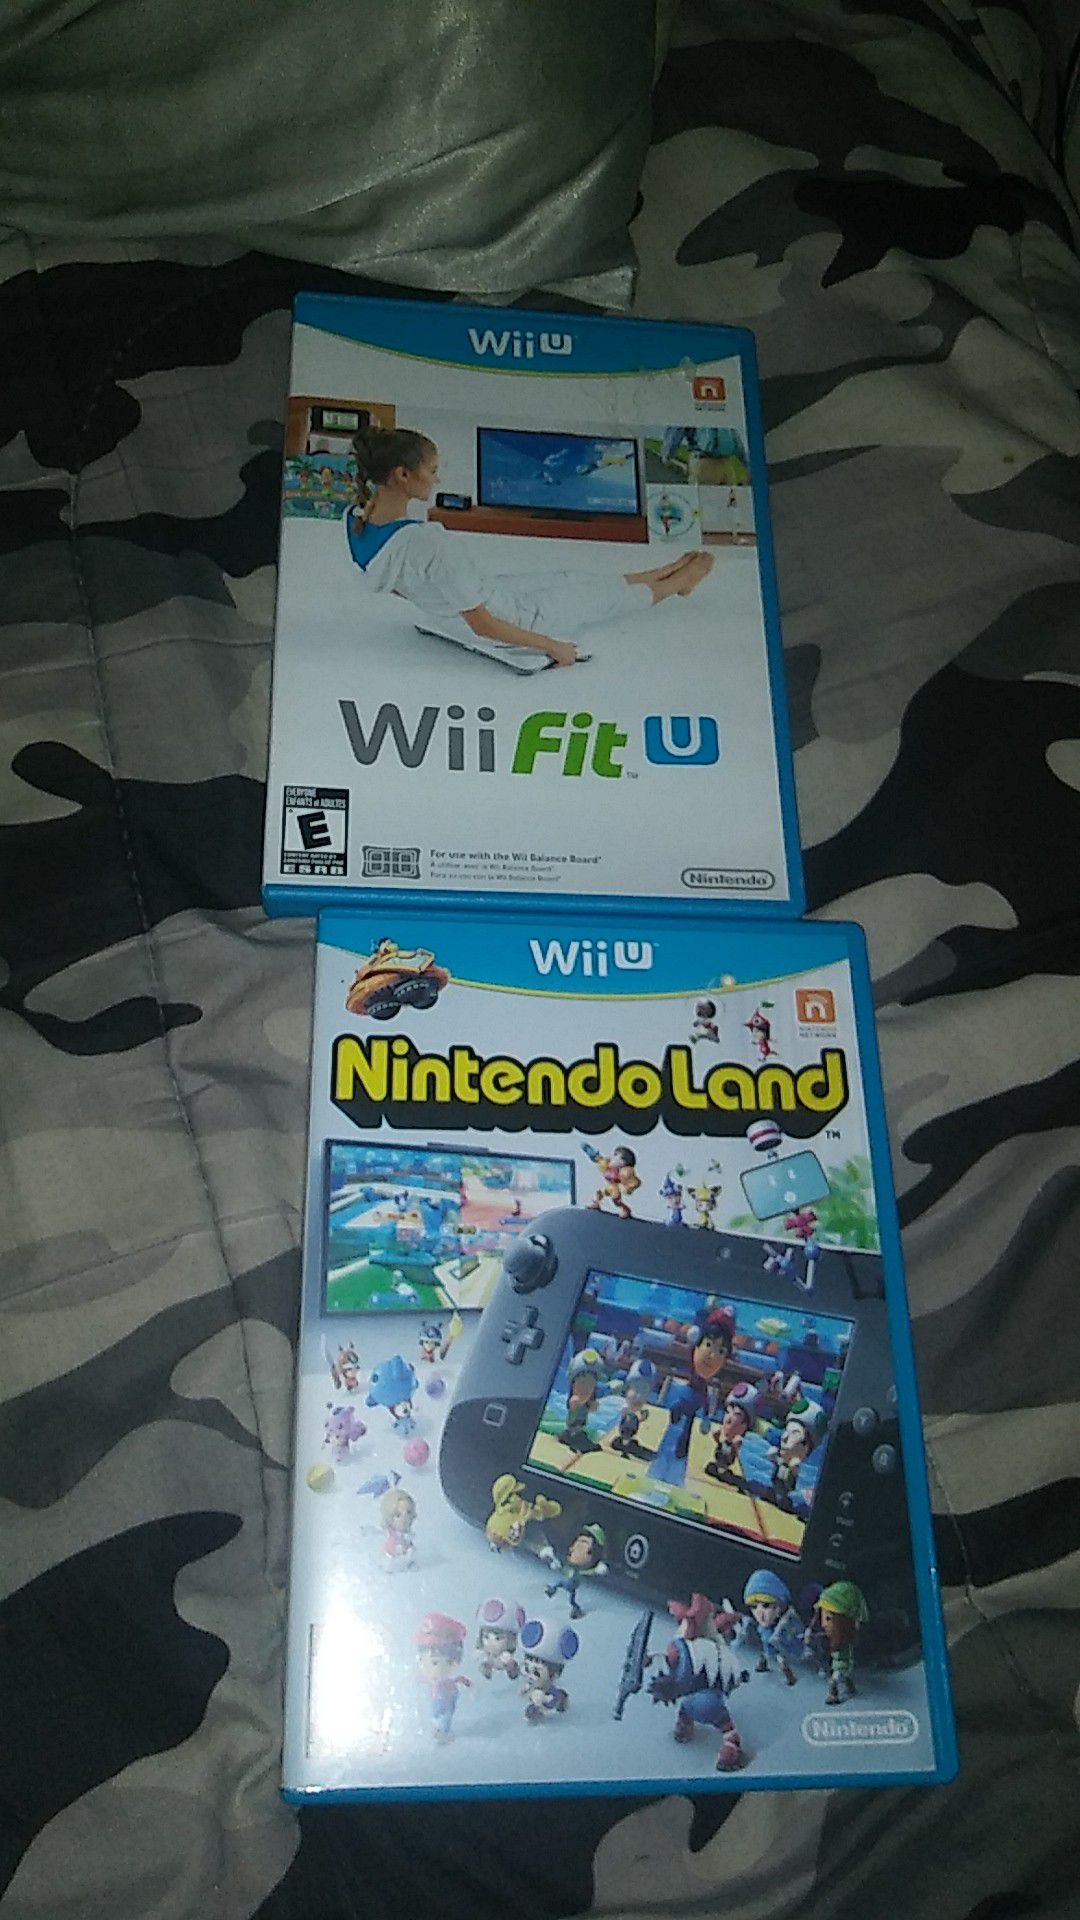 Two wii u video games: Nintendo land and Wii fit u